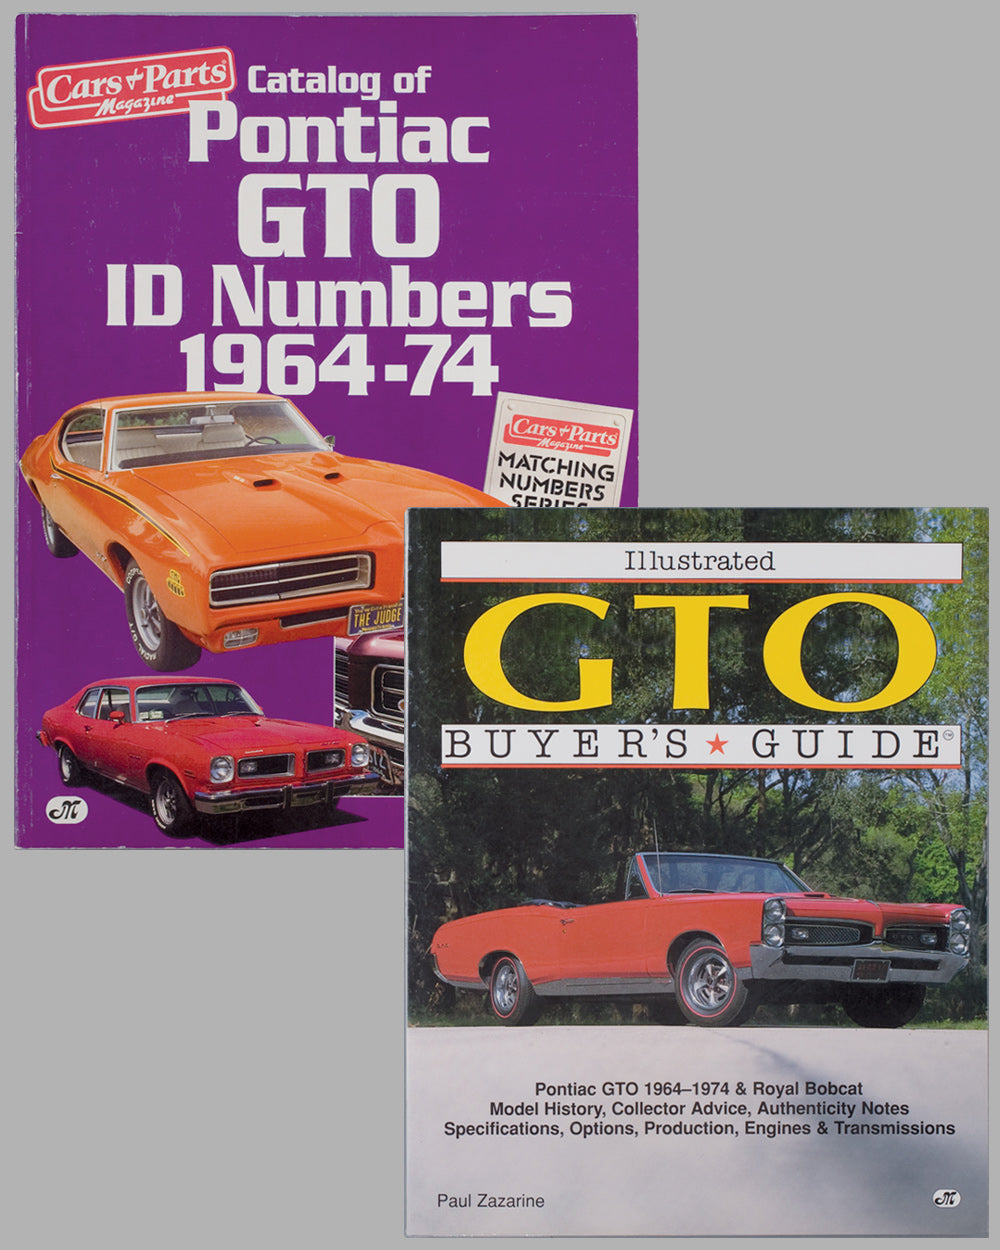 Buyer's Guide to the 1964 Pontiac GTO